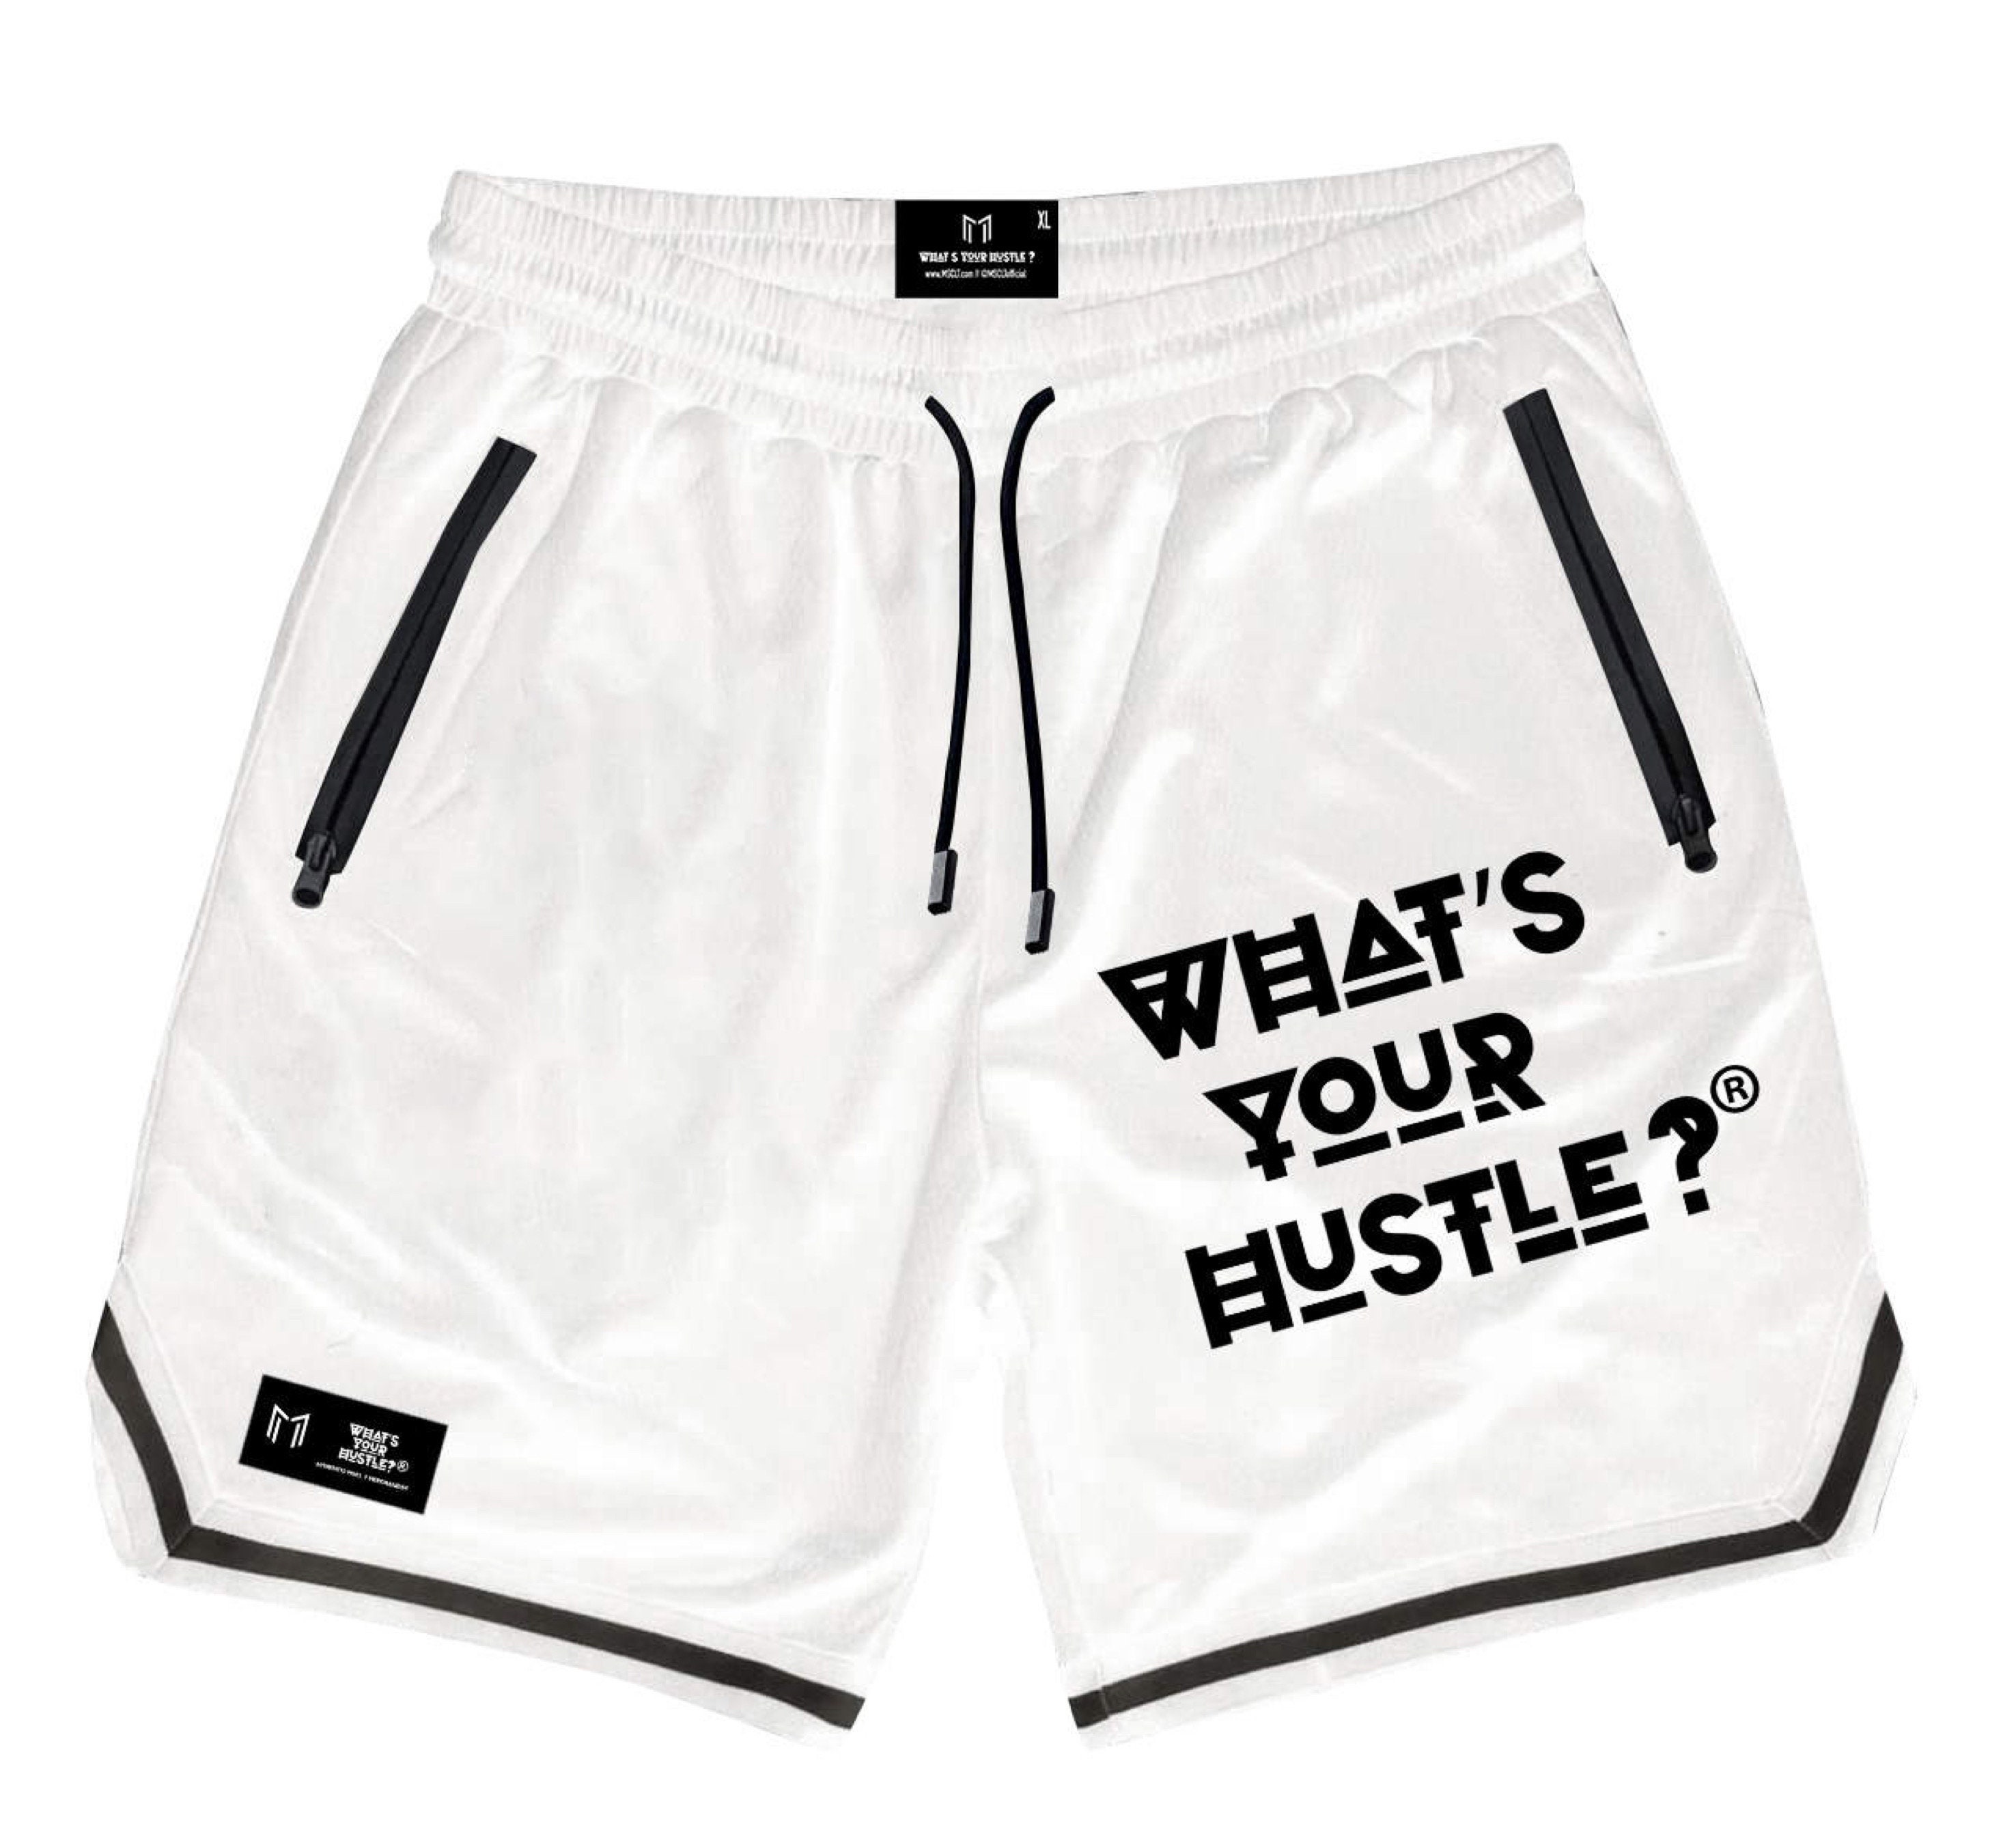 BROOKLYN NETS BASKETBALL STATEMENT SHORTS – Prime Reps